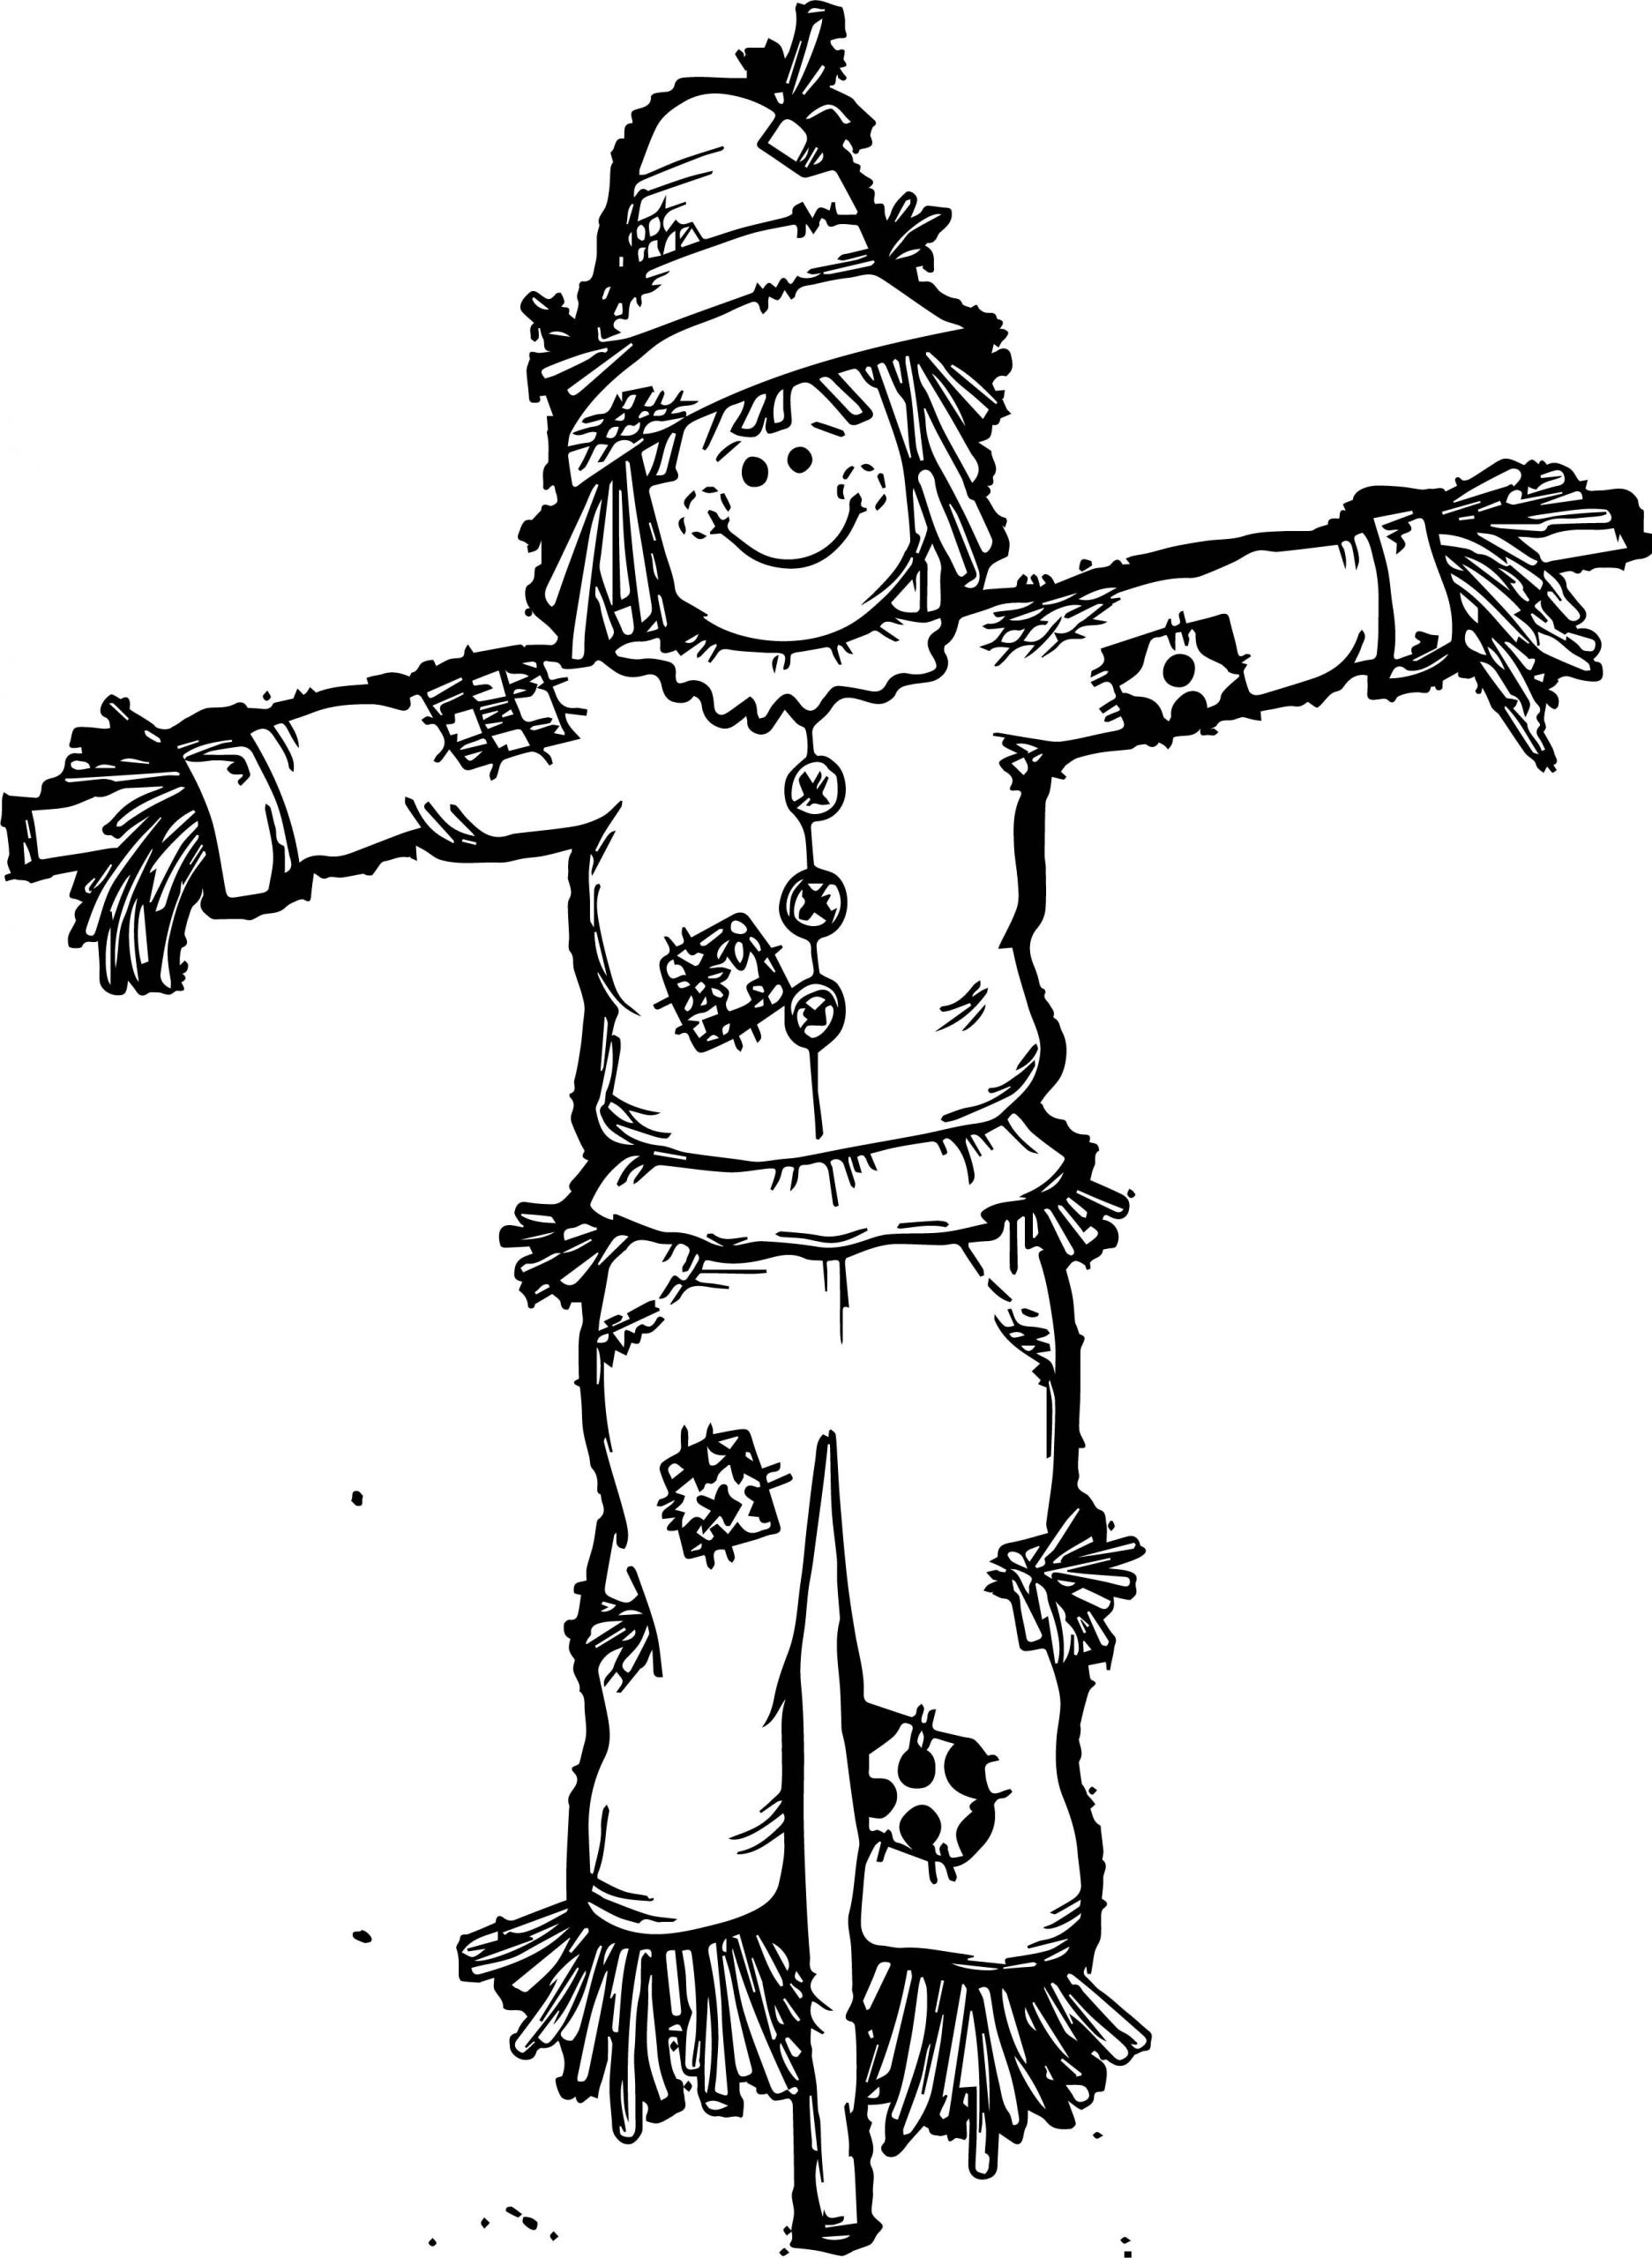 Printable Scarecrow Coloring Pages
 Scarecrow Drawing at GetDrawings